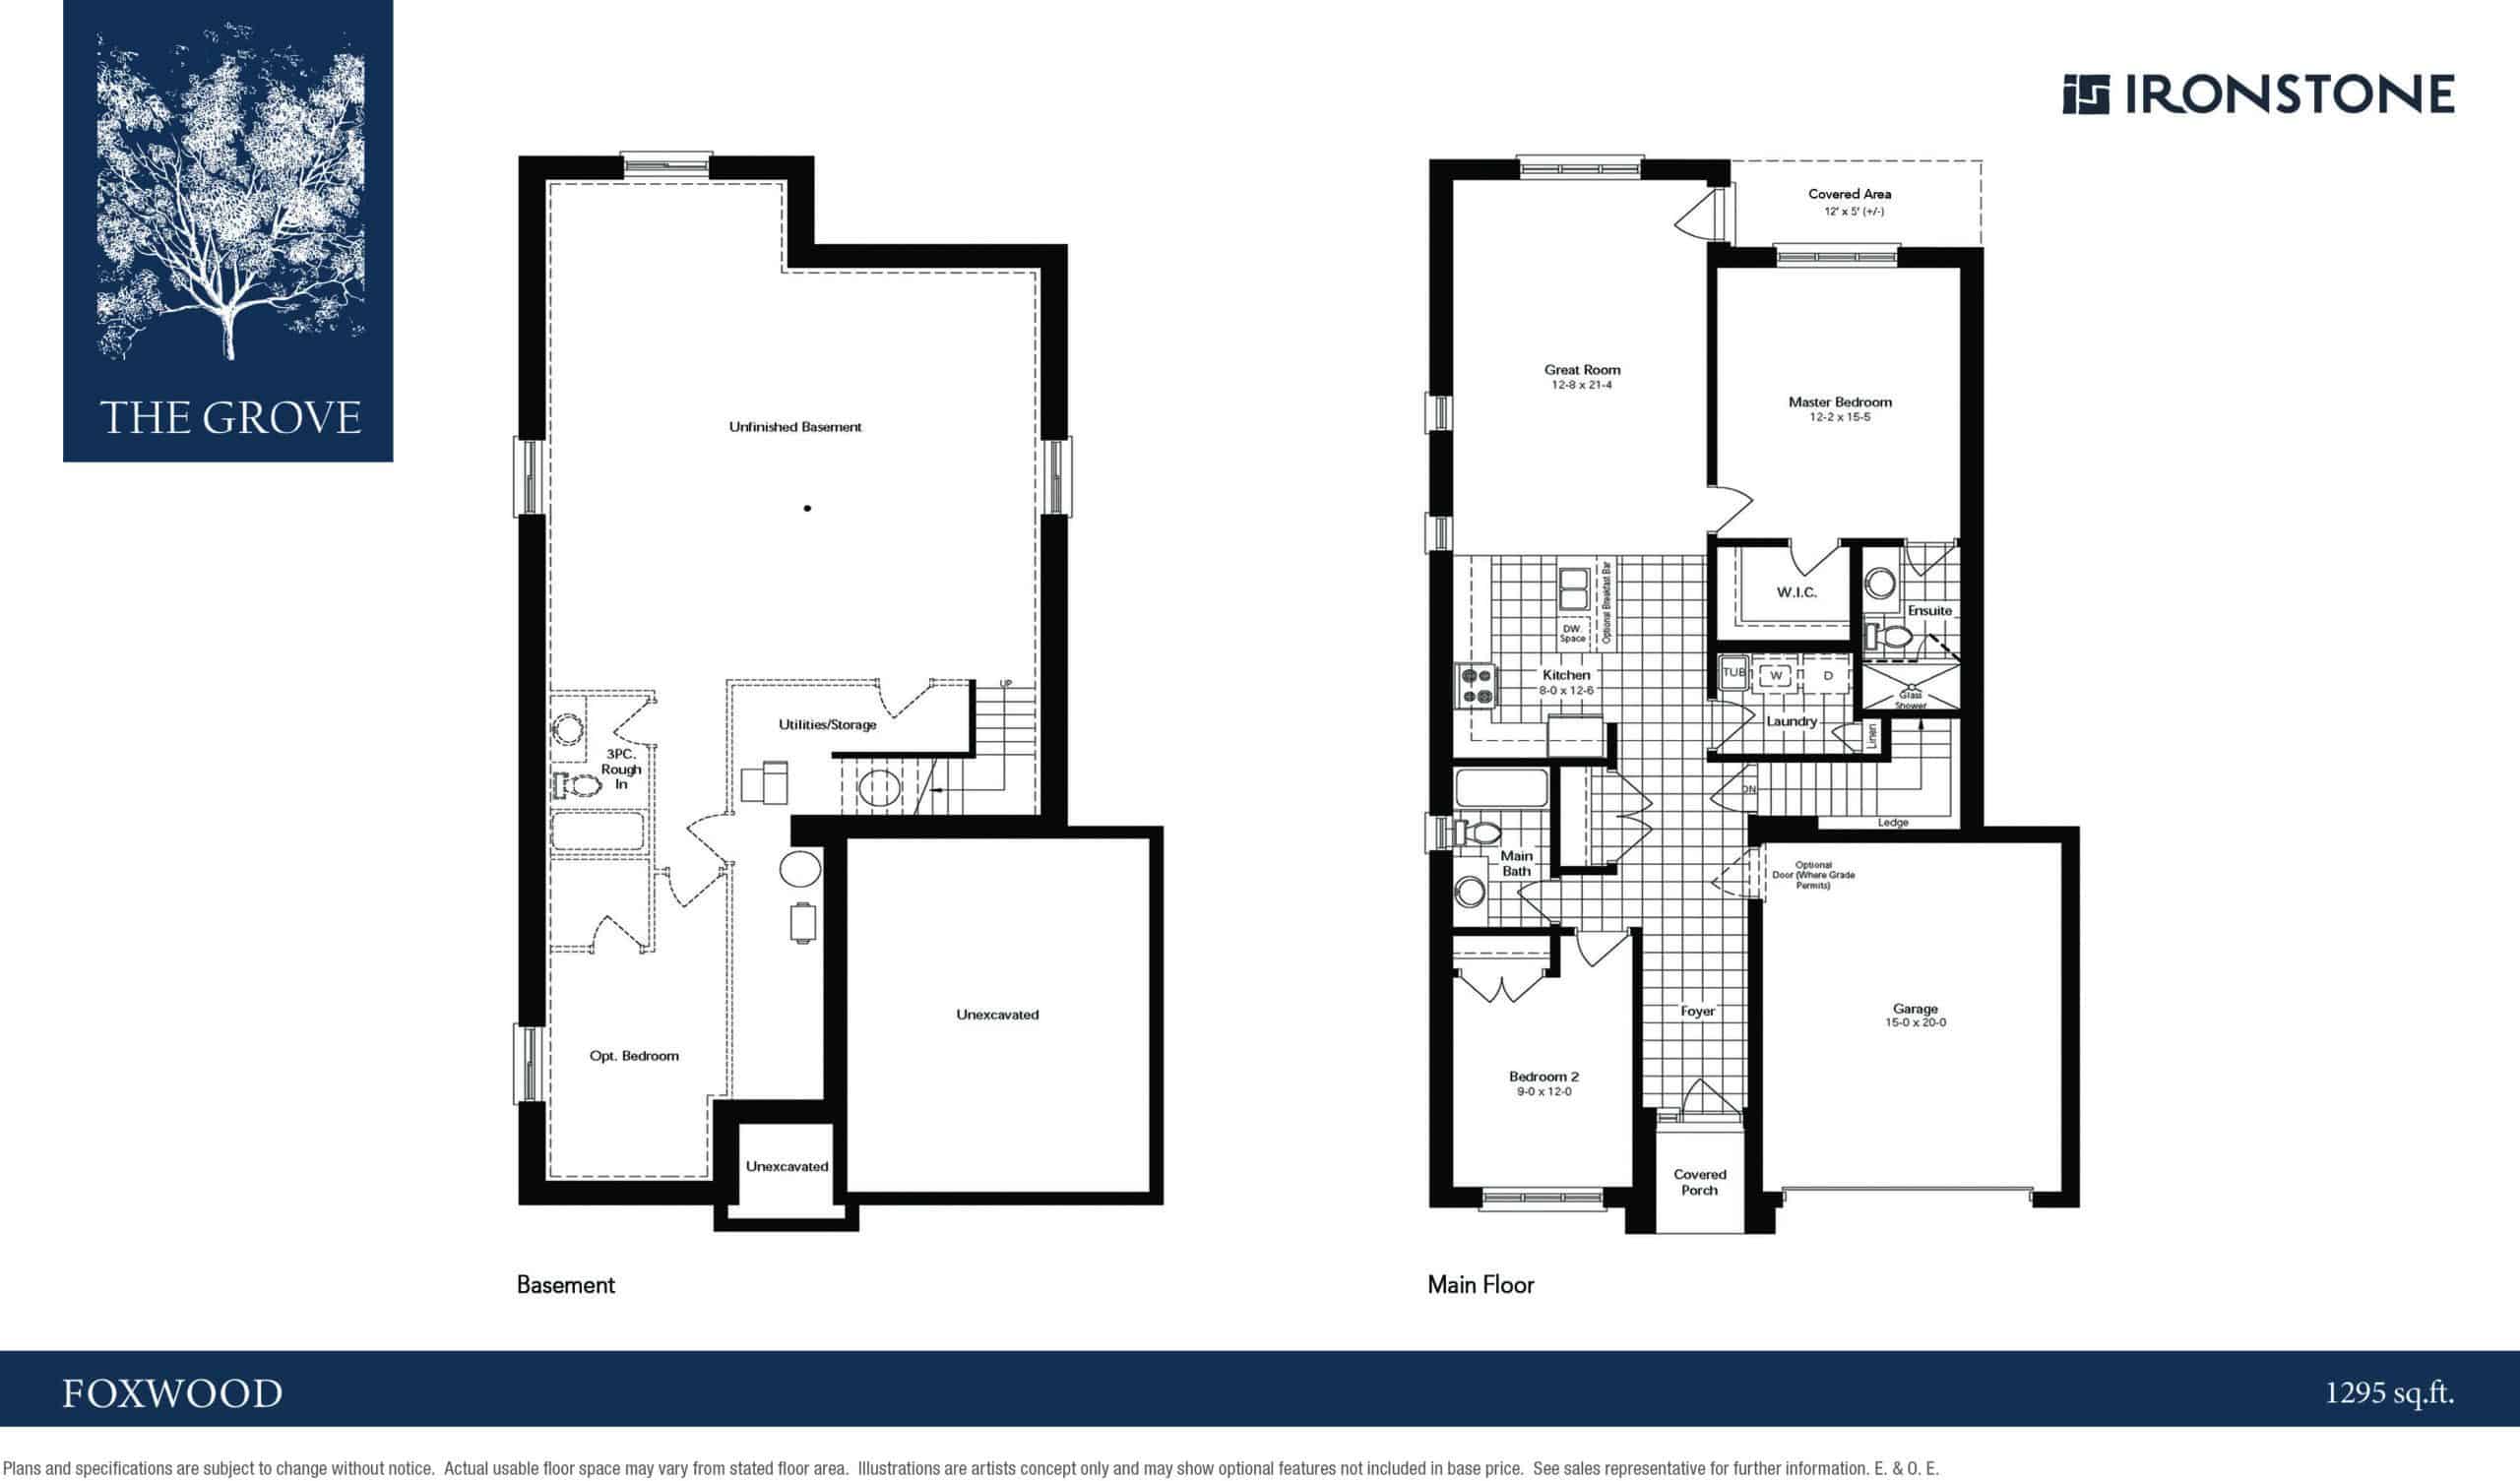  Foxwood Home  Floor Plan of  The Grove with undefined beds